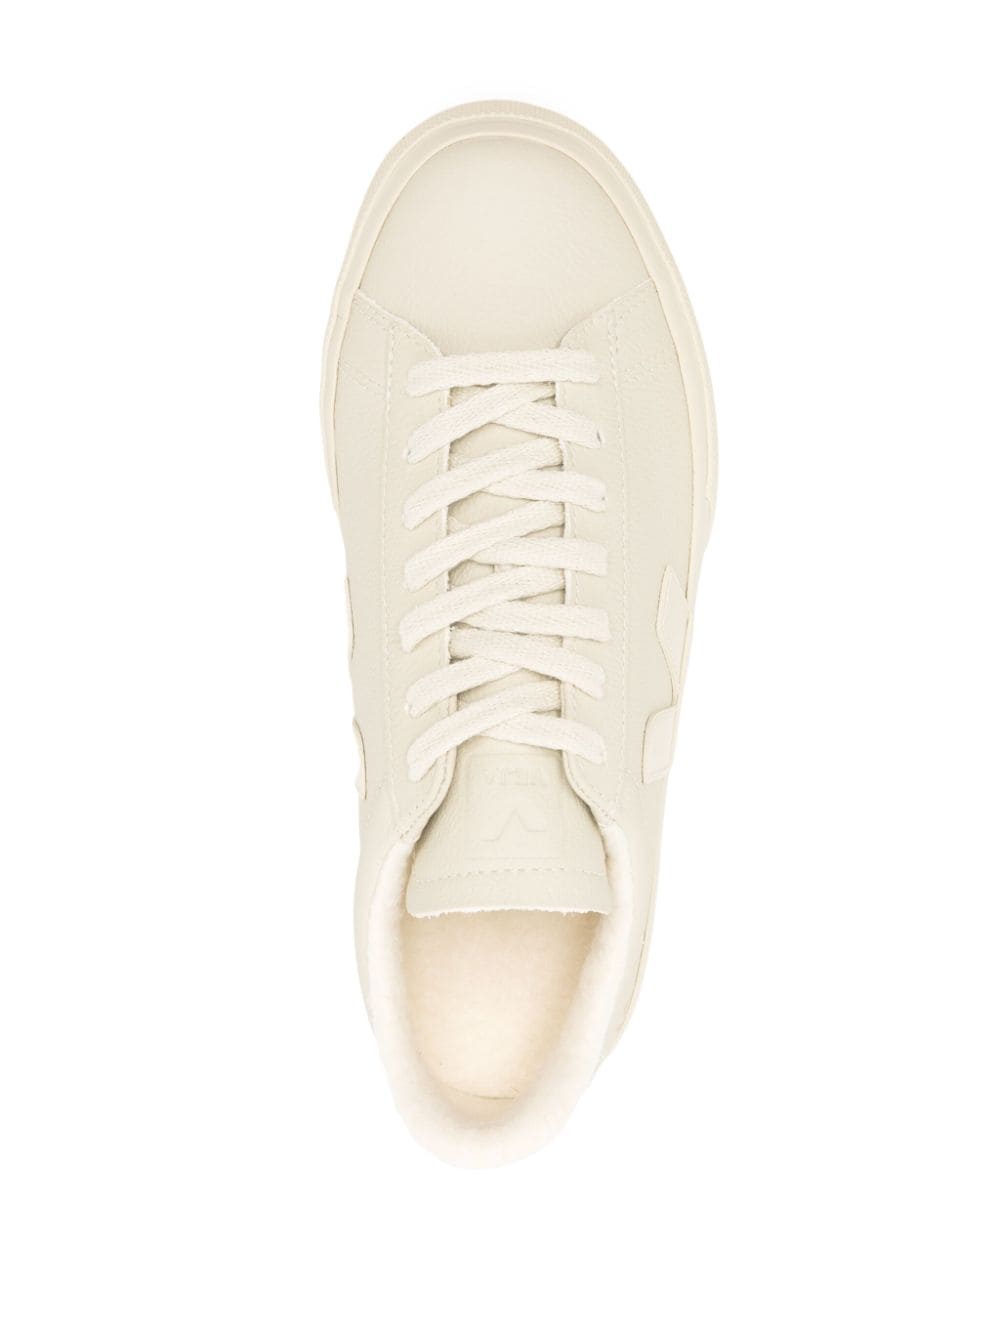 VEJA Campo Leather Sneakers - Farfetch